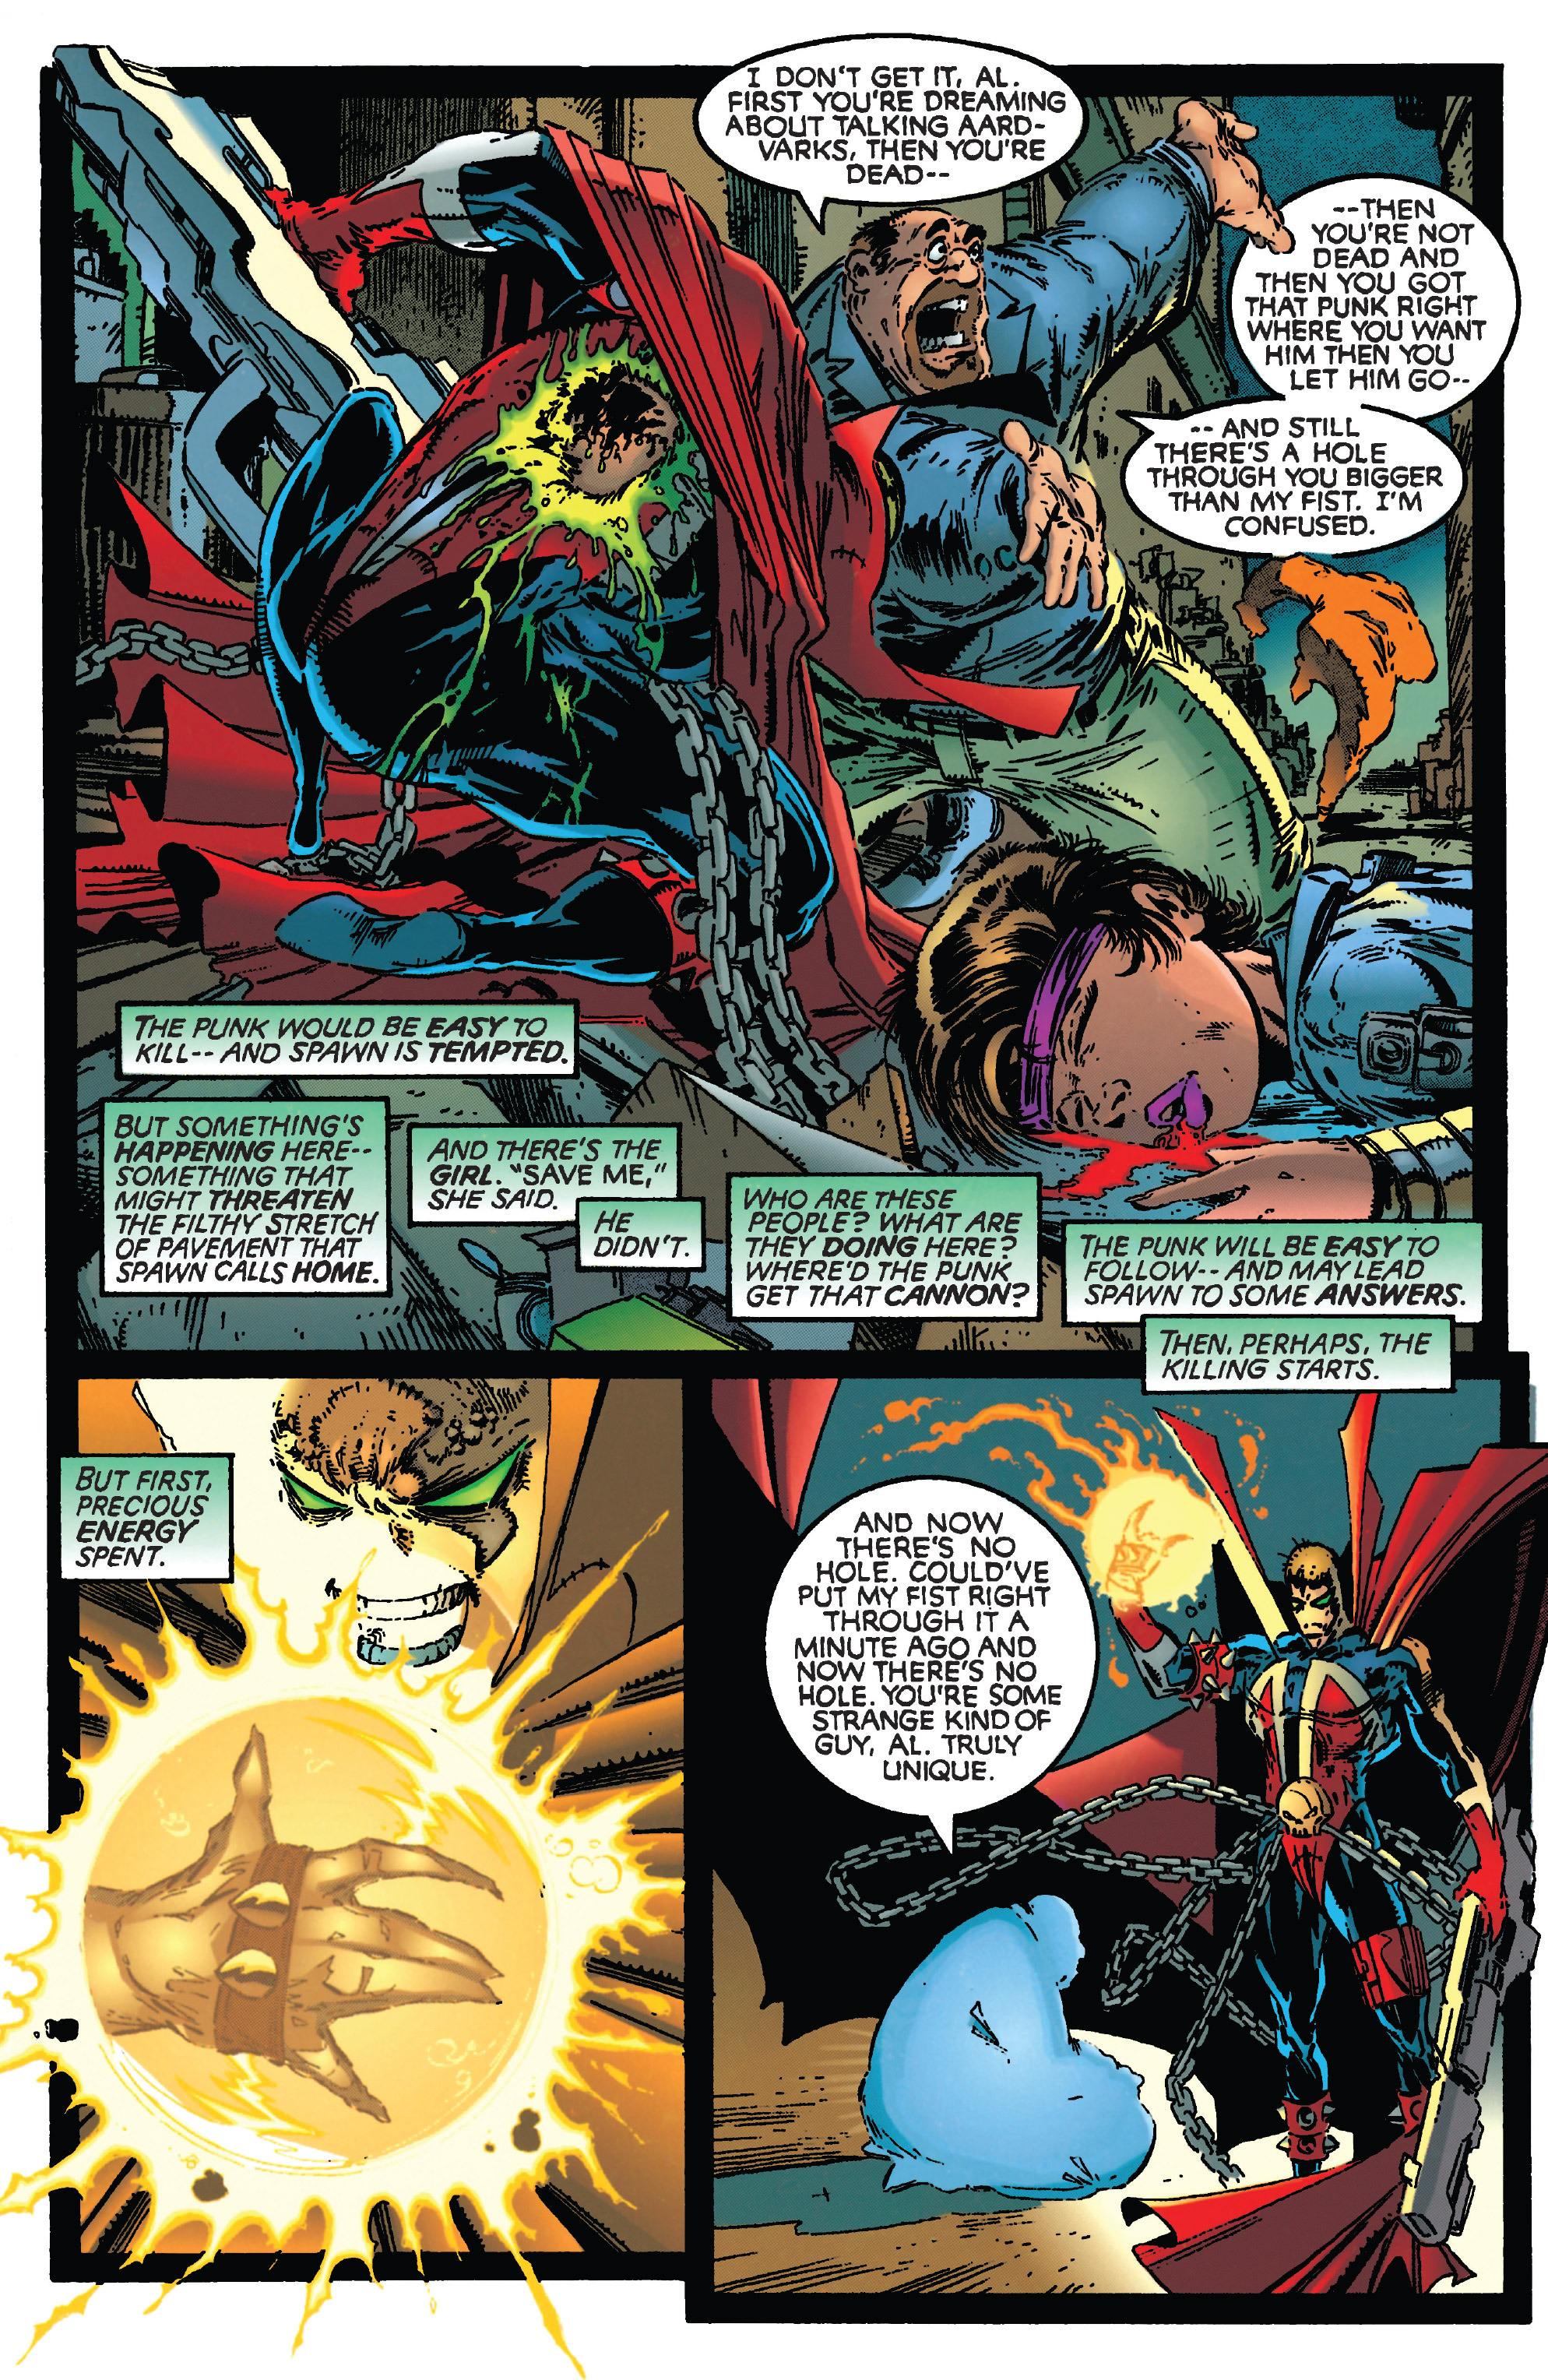 Read online Spawn comic -  Issue #11 - 10